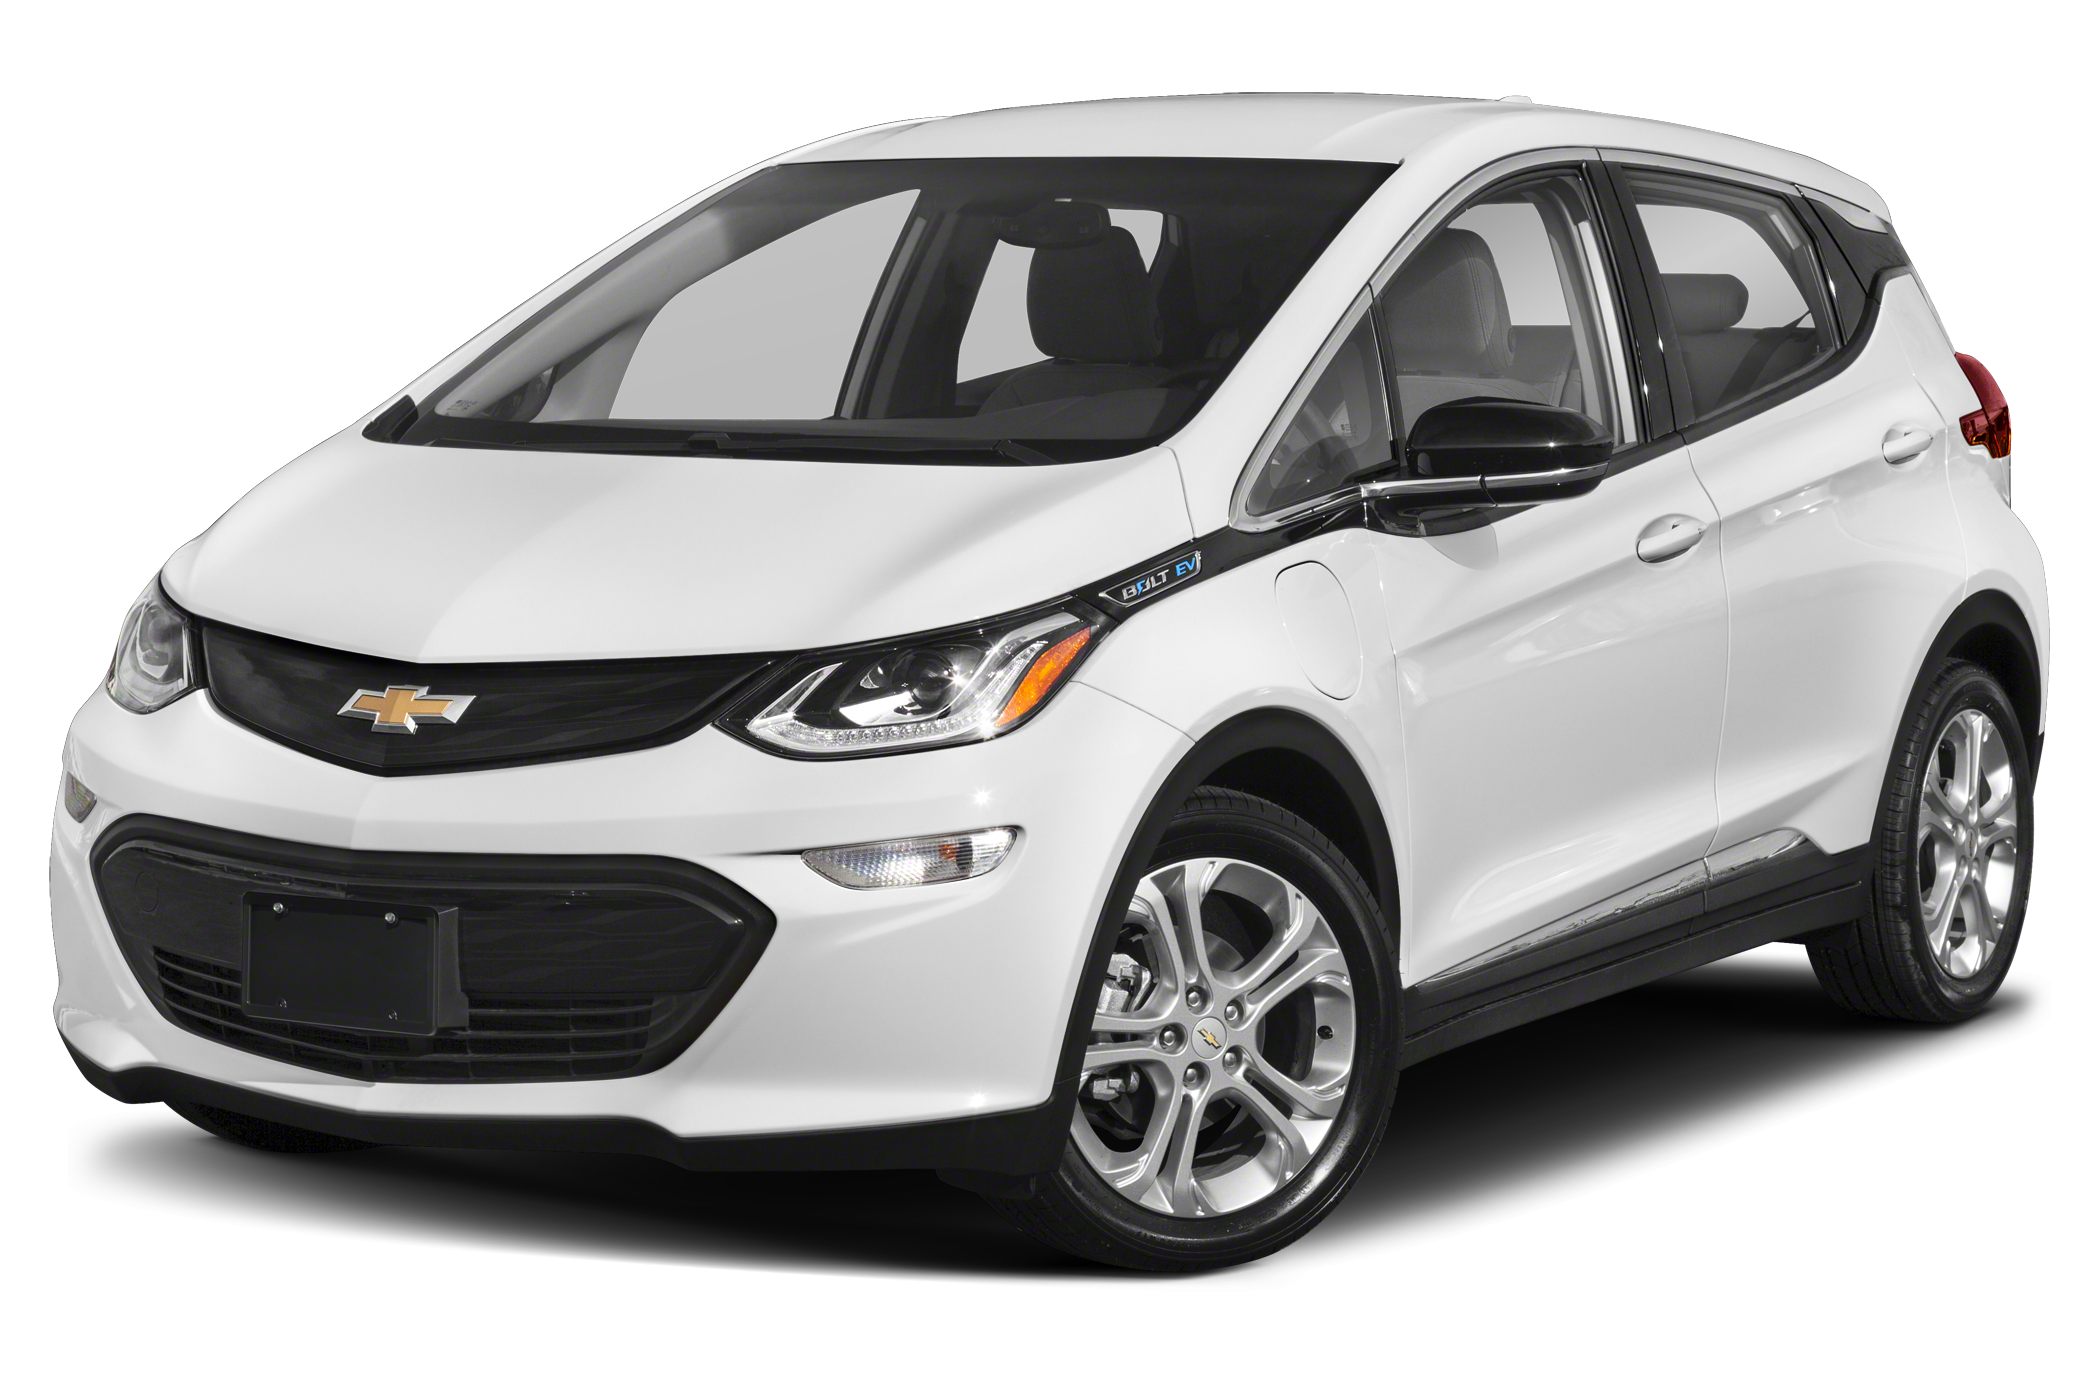 which used year model of chevy bolt is best